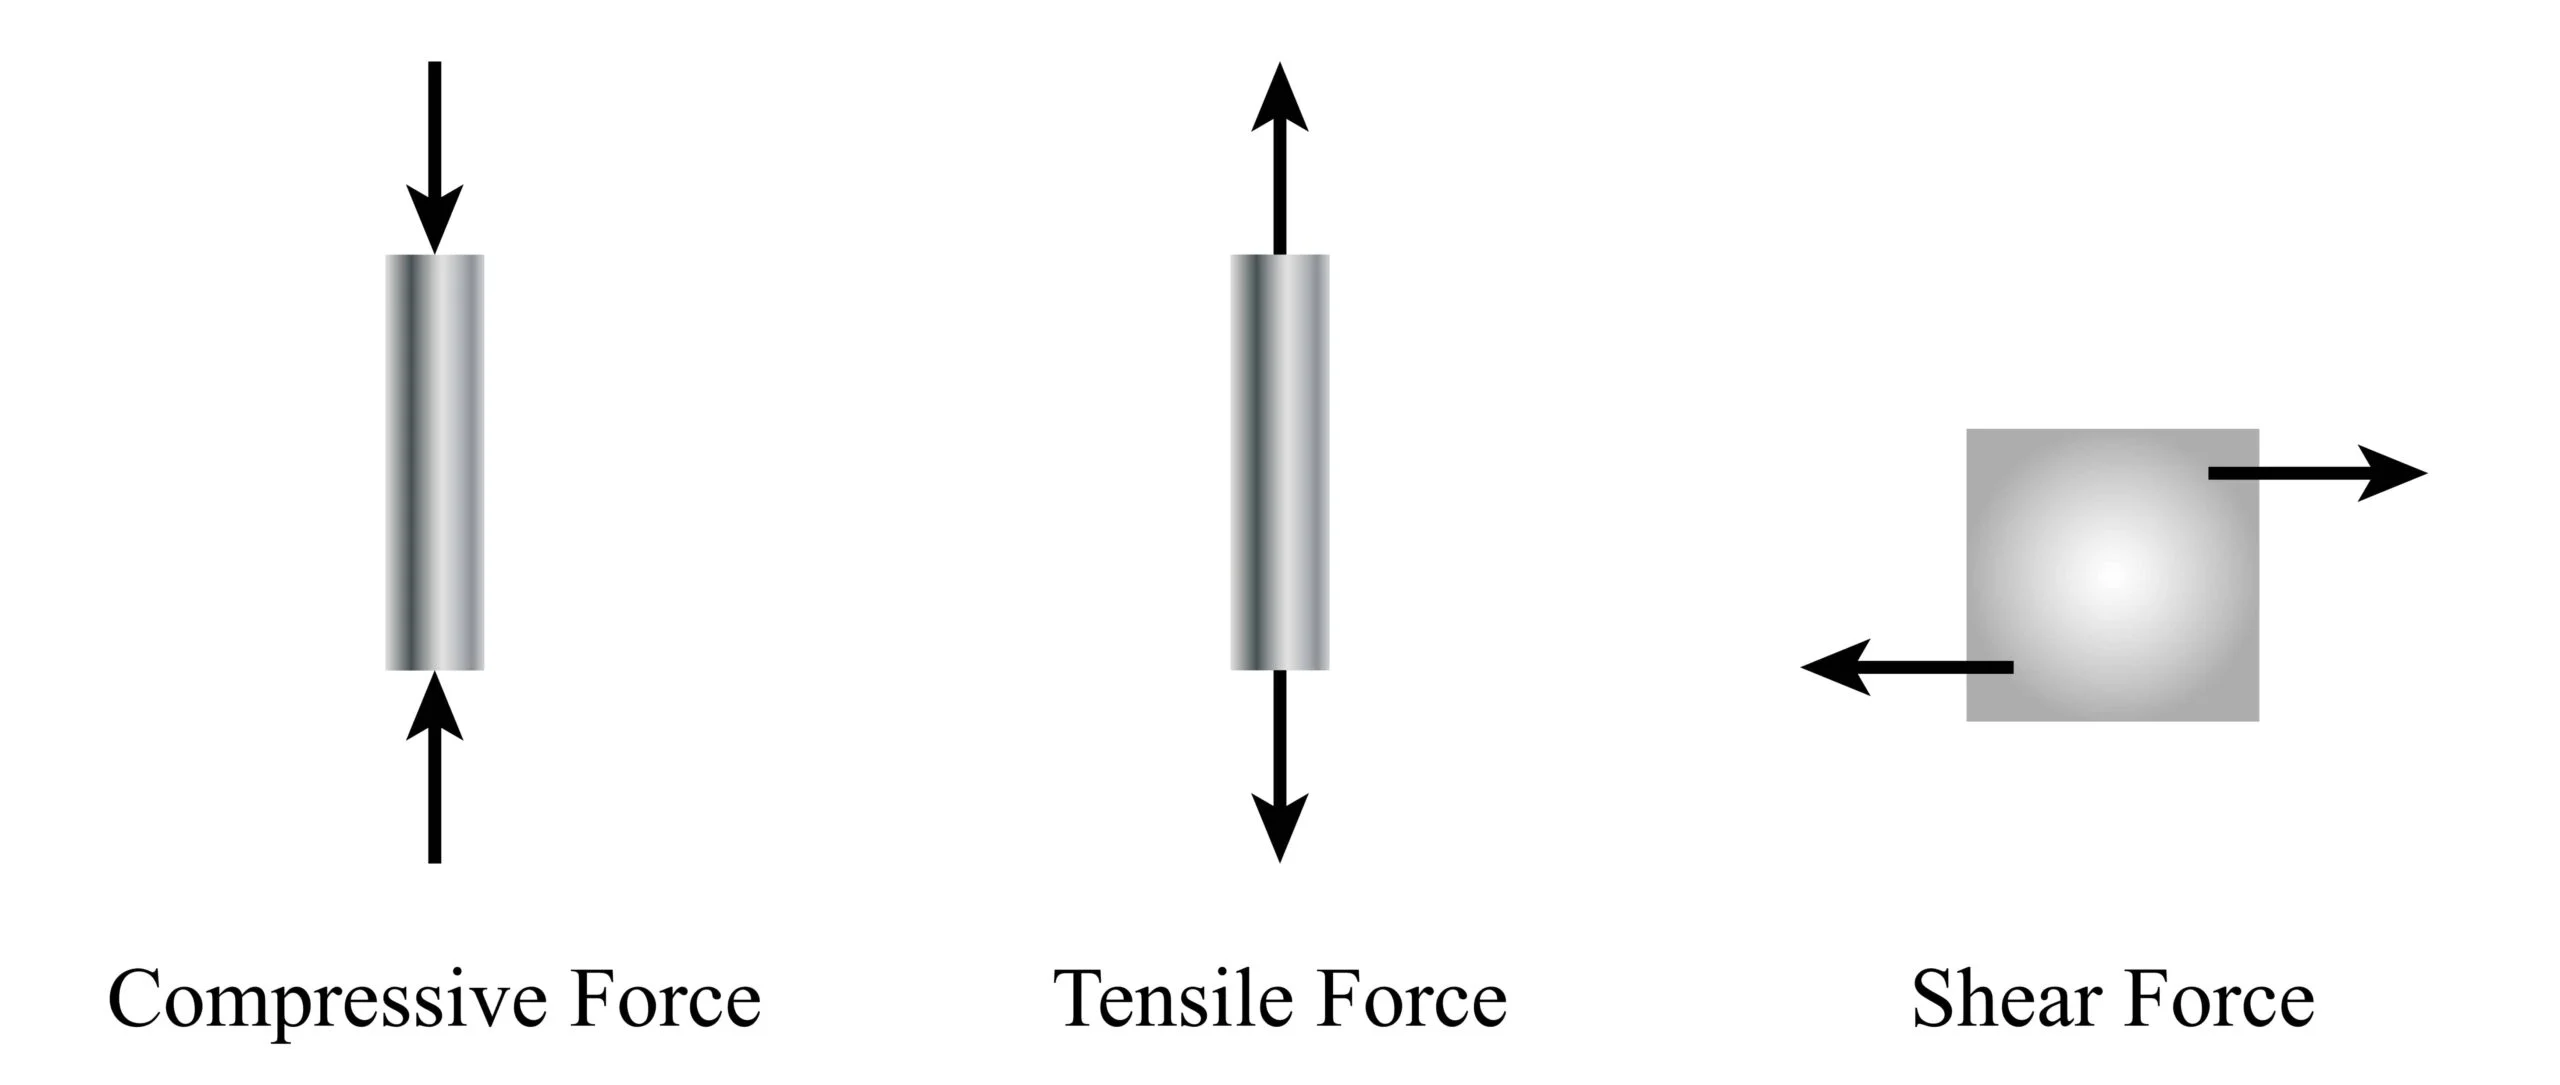 15: A -Illustration of pressure distribution applied by compression